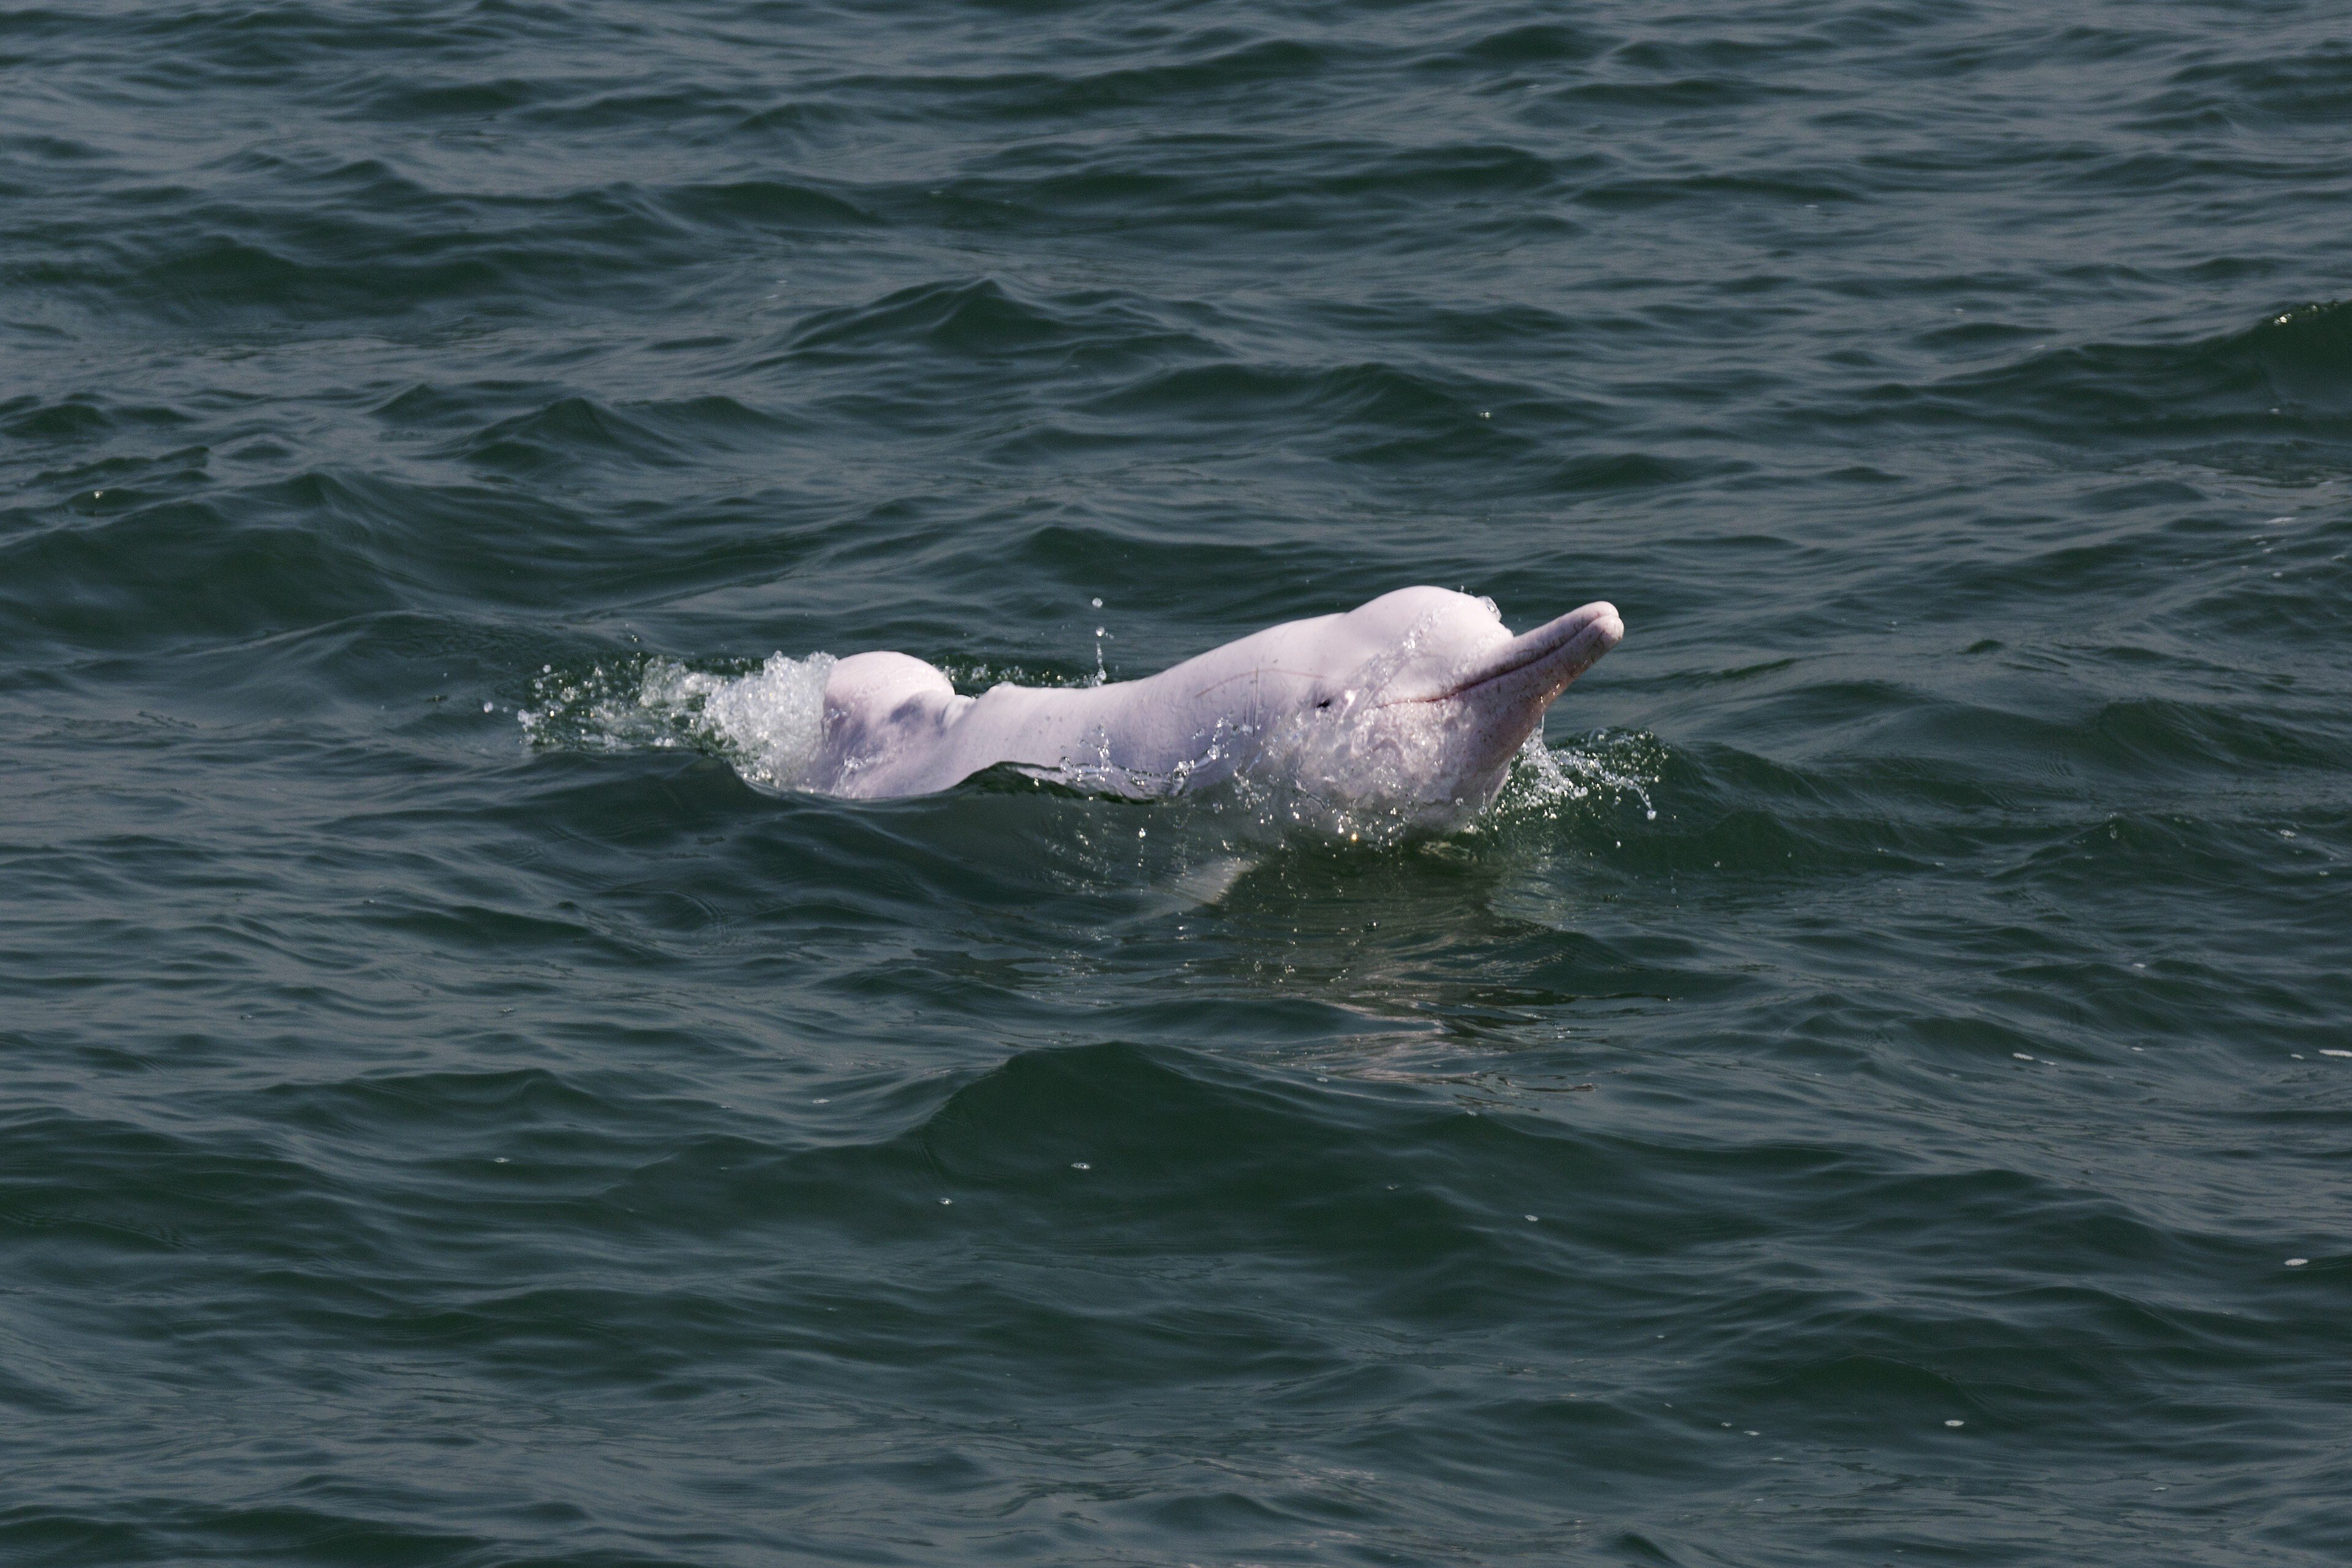 The number of dolphins in Hong Kong has fallen by 80 per cent over the past 15 years. Photo: Handout